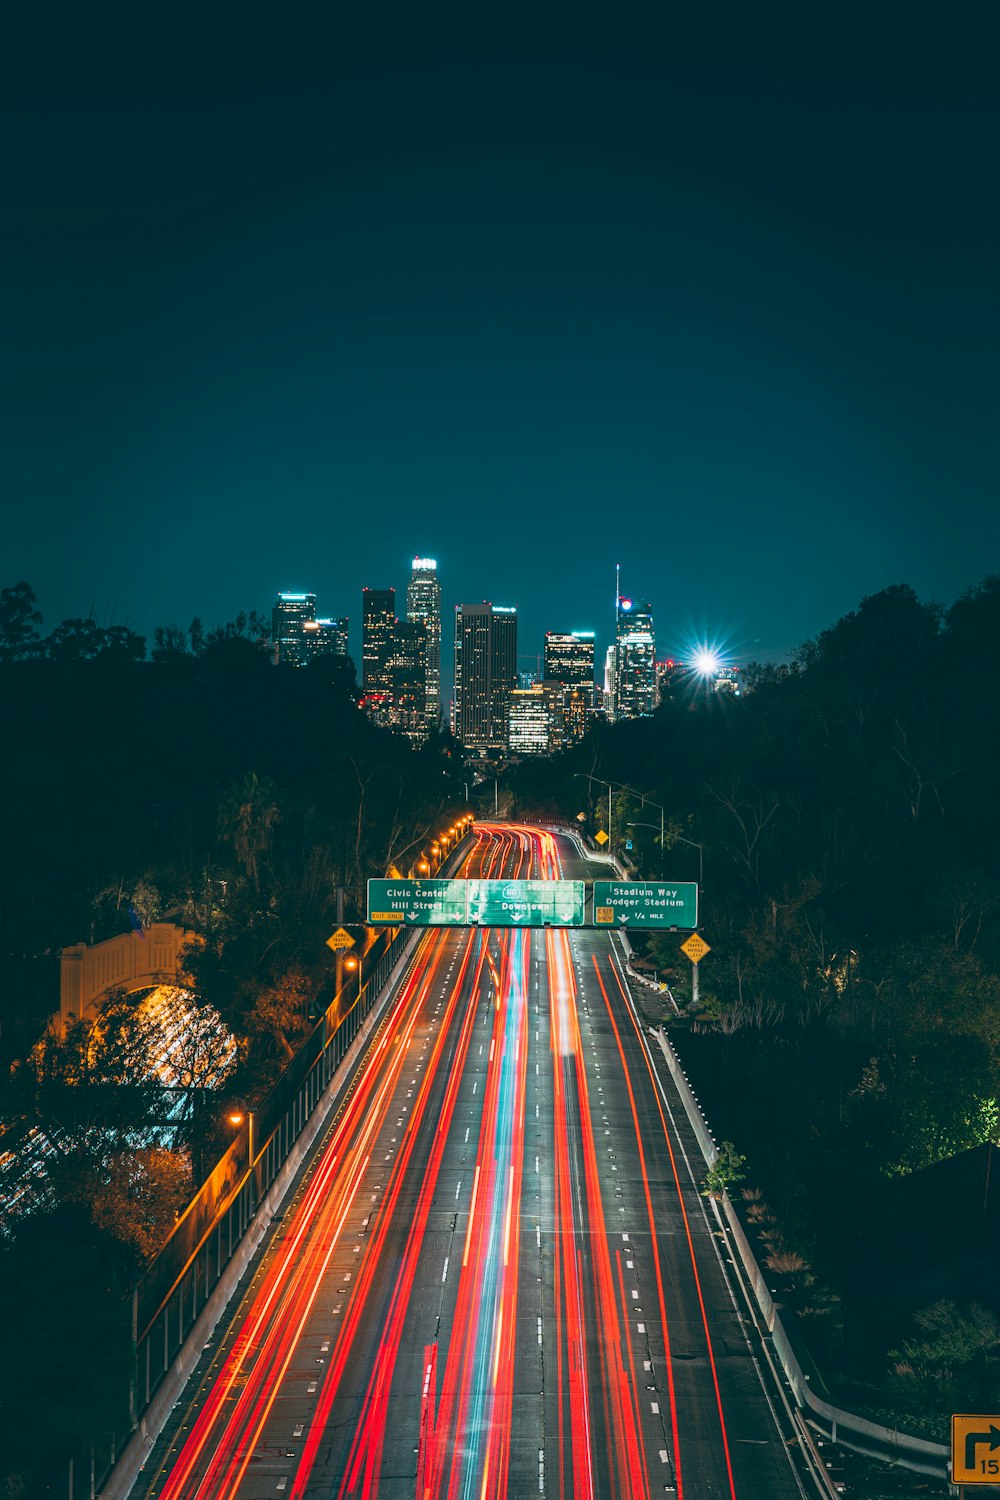 a long exposure photo of a city at night